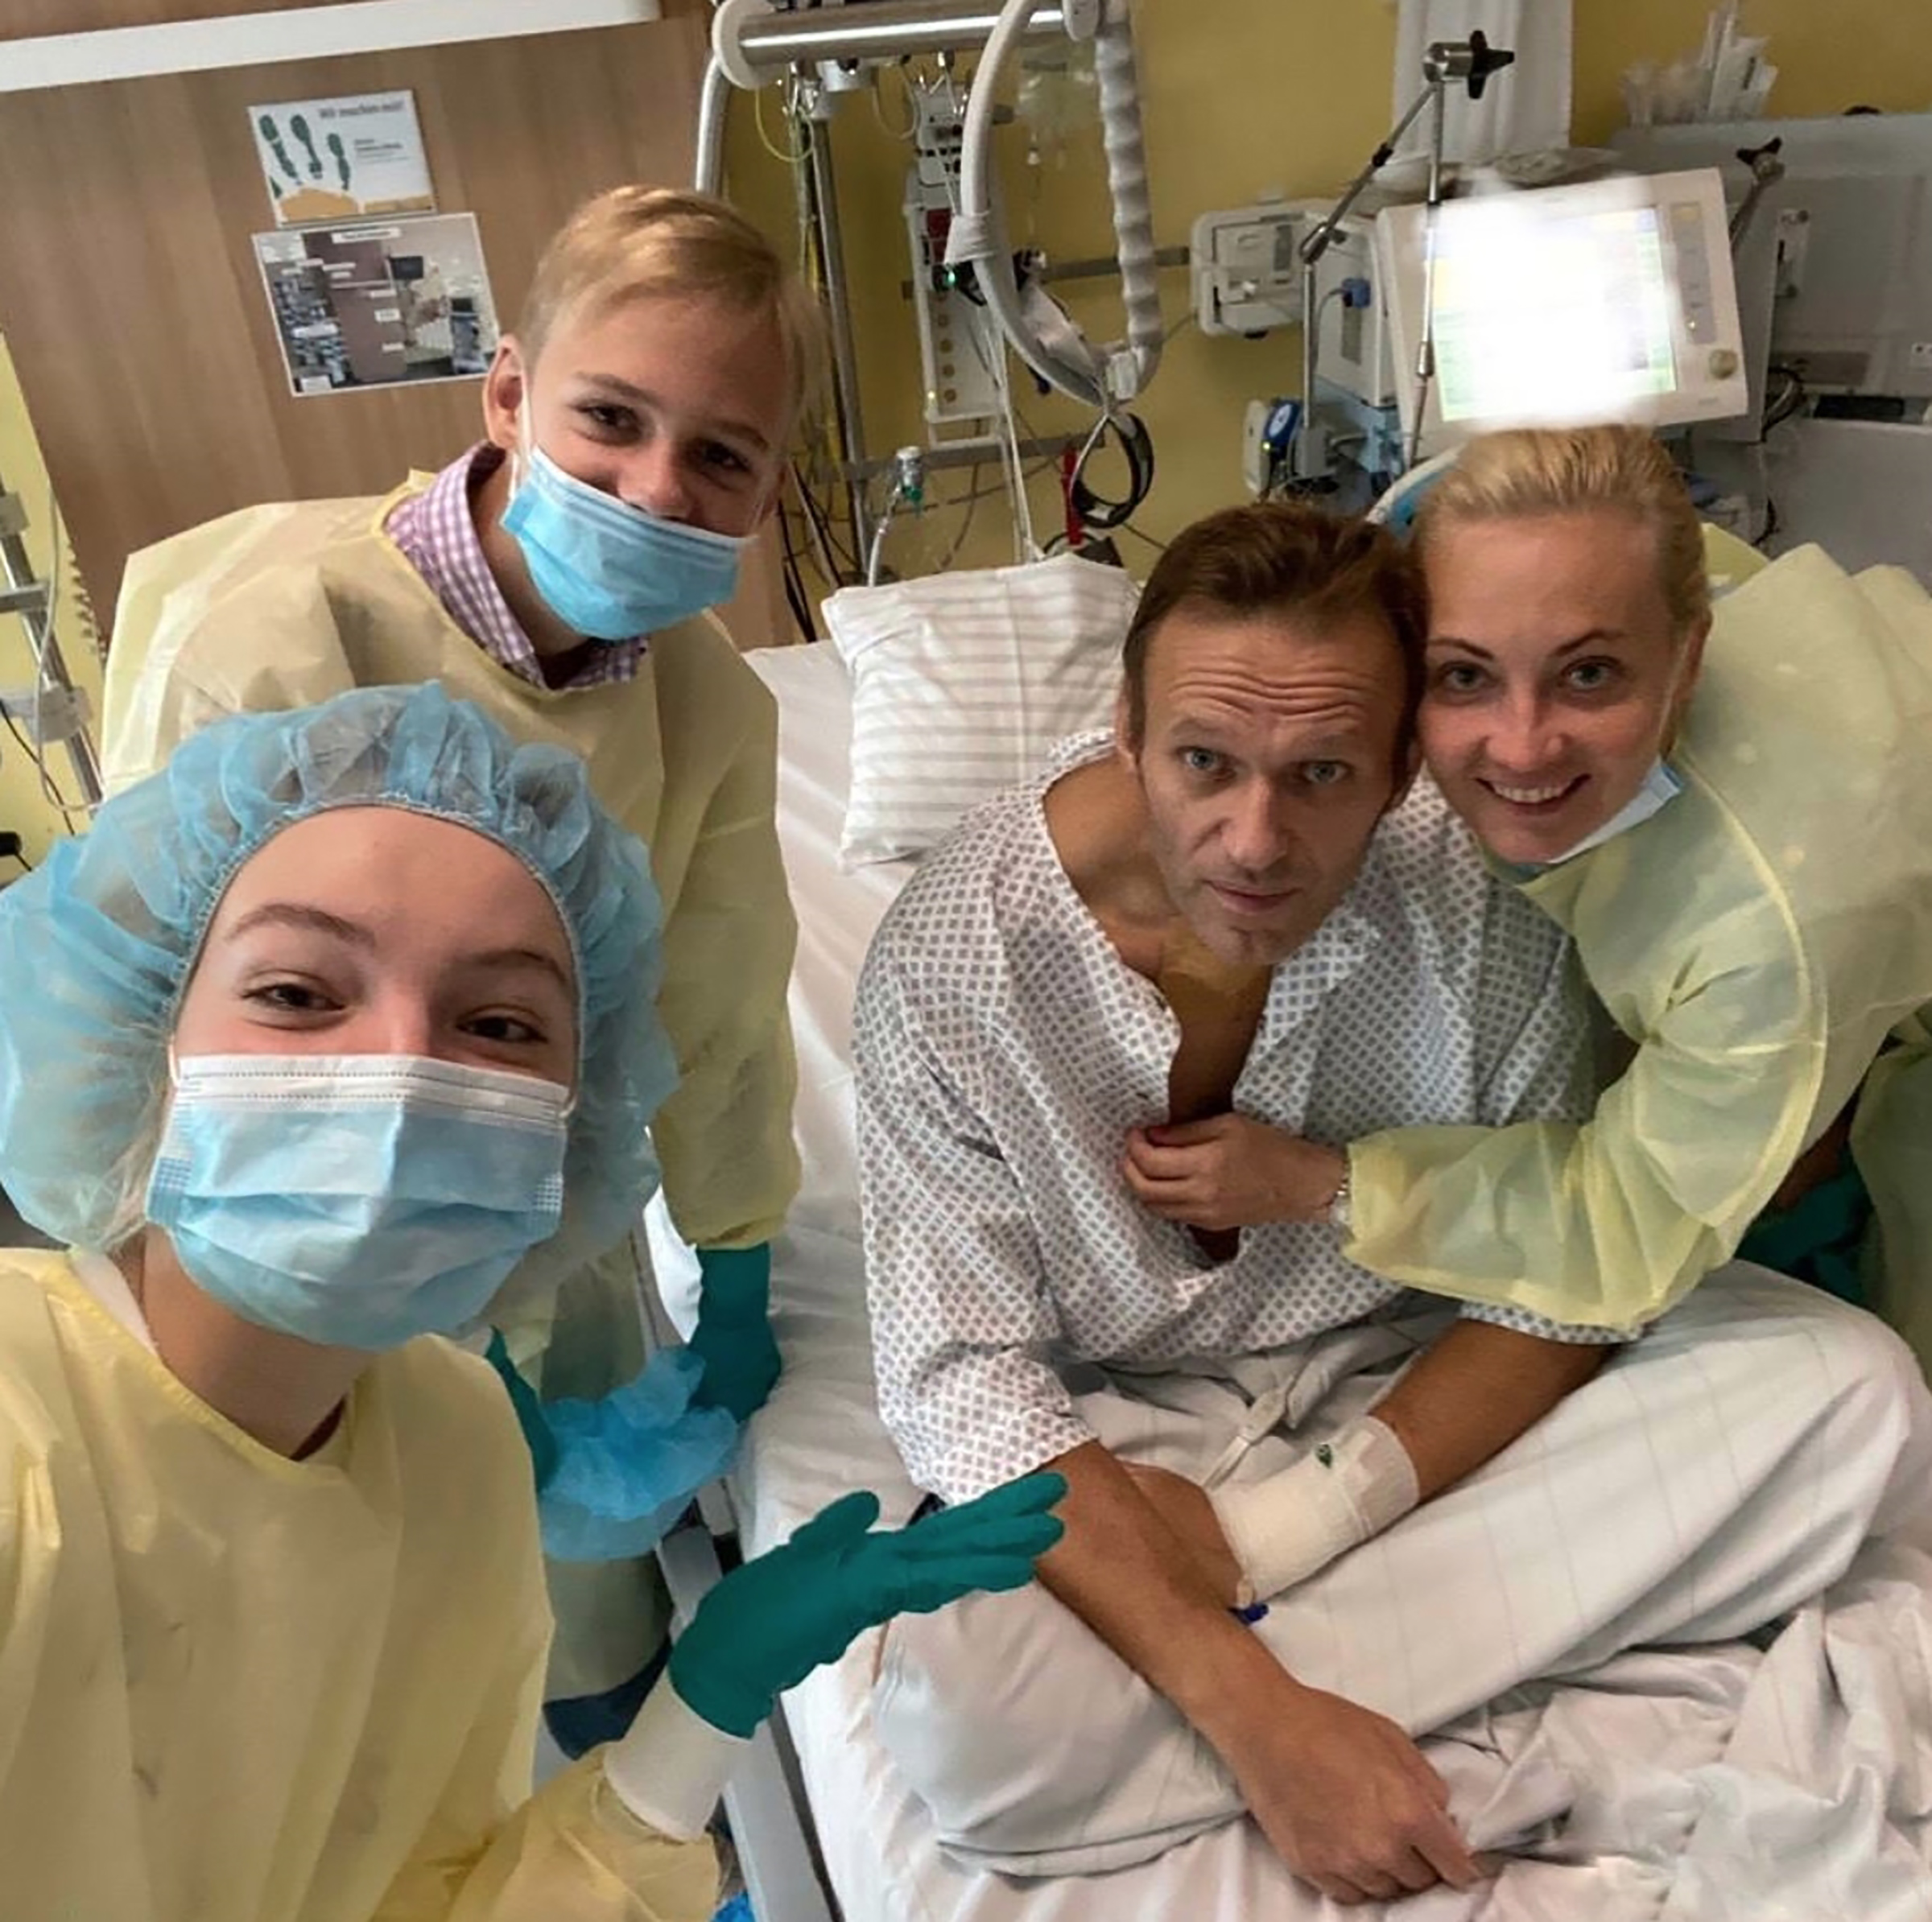 An image shared on the Instagram account of Alexei Navalny shows the Russian opposition leader on a hospital bed surrounded by his wife and two children as his treatment continues in Berlin on Sept. 15, 2020.